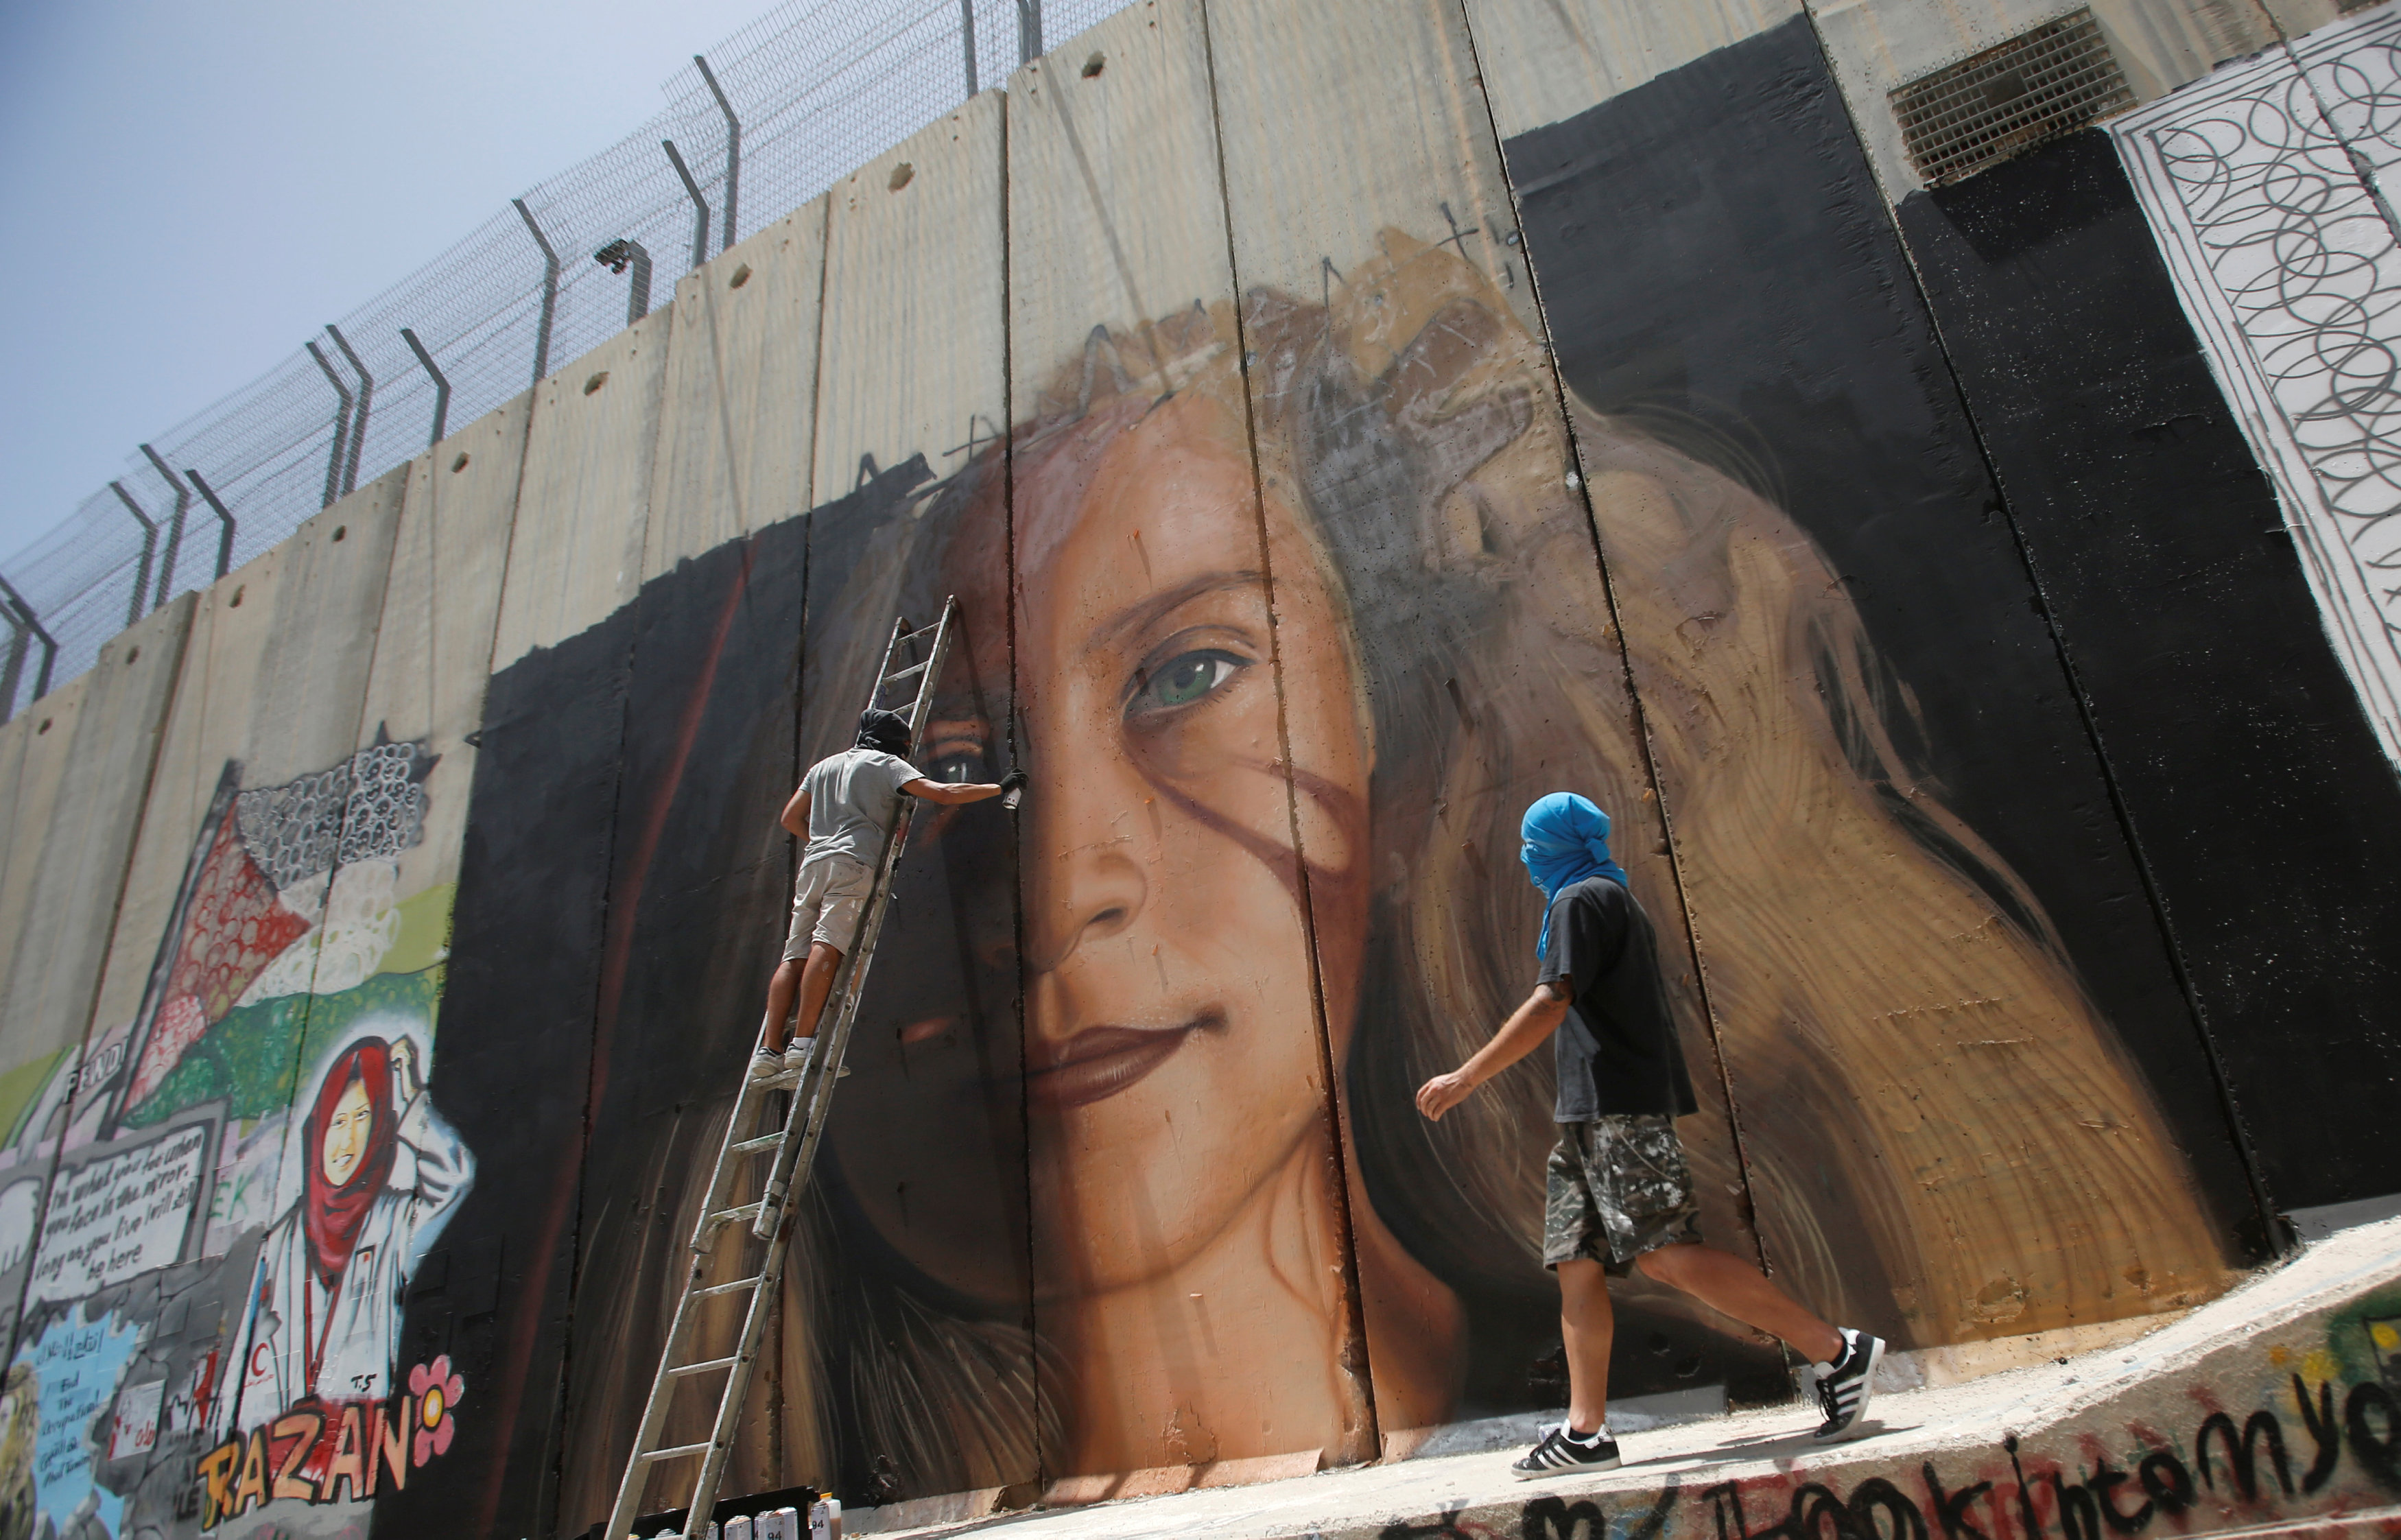 Foreign artist paints on the Israeli wall a mural depicting Palestinian teen Ahed Tamimi who is detained by Israel, in Bethlehem, in the occupied West Bank